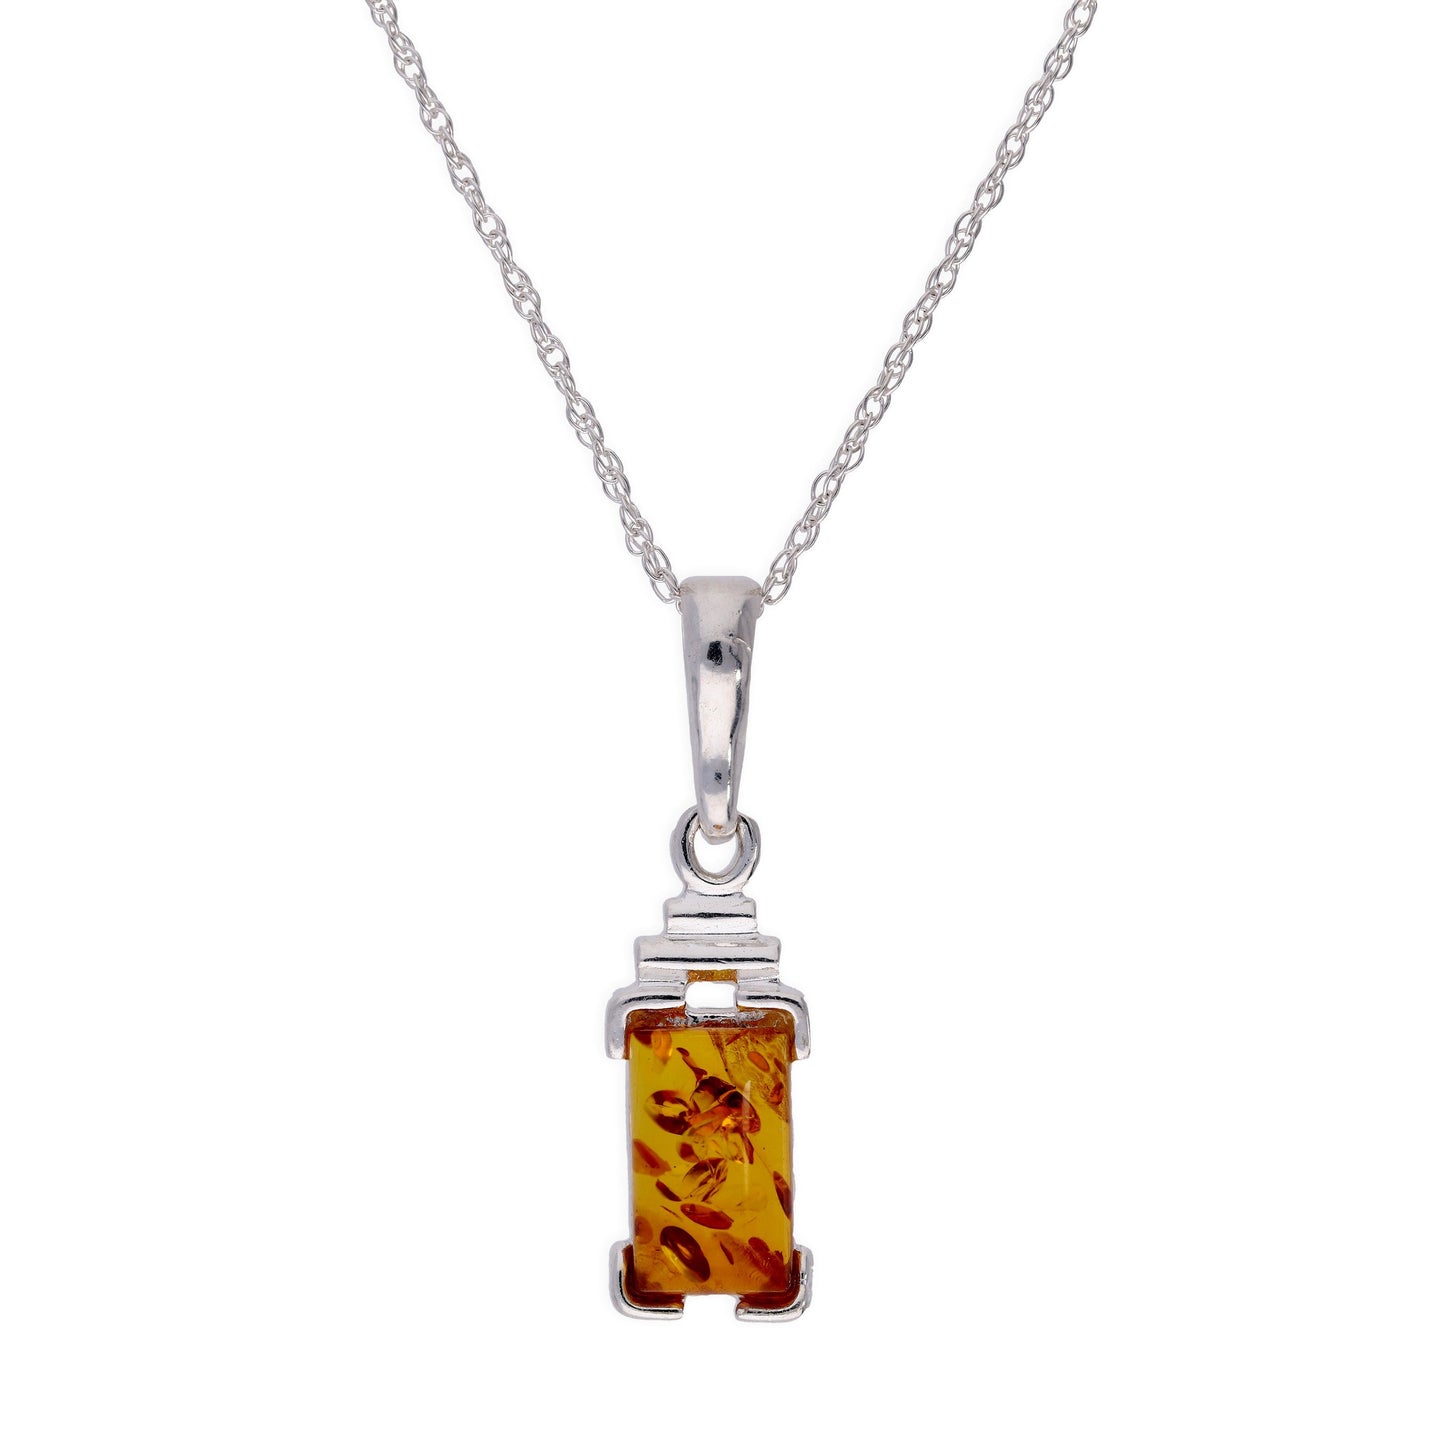 Sterling Silver & Baltic Amber Rectangular Pendant Necklace 16 - 22 Inches